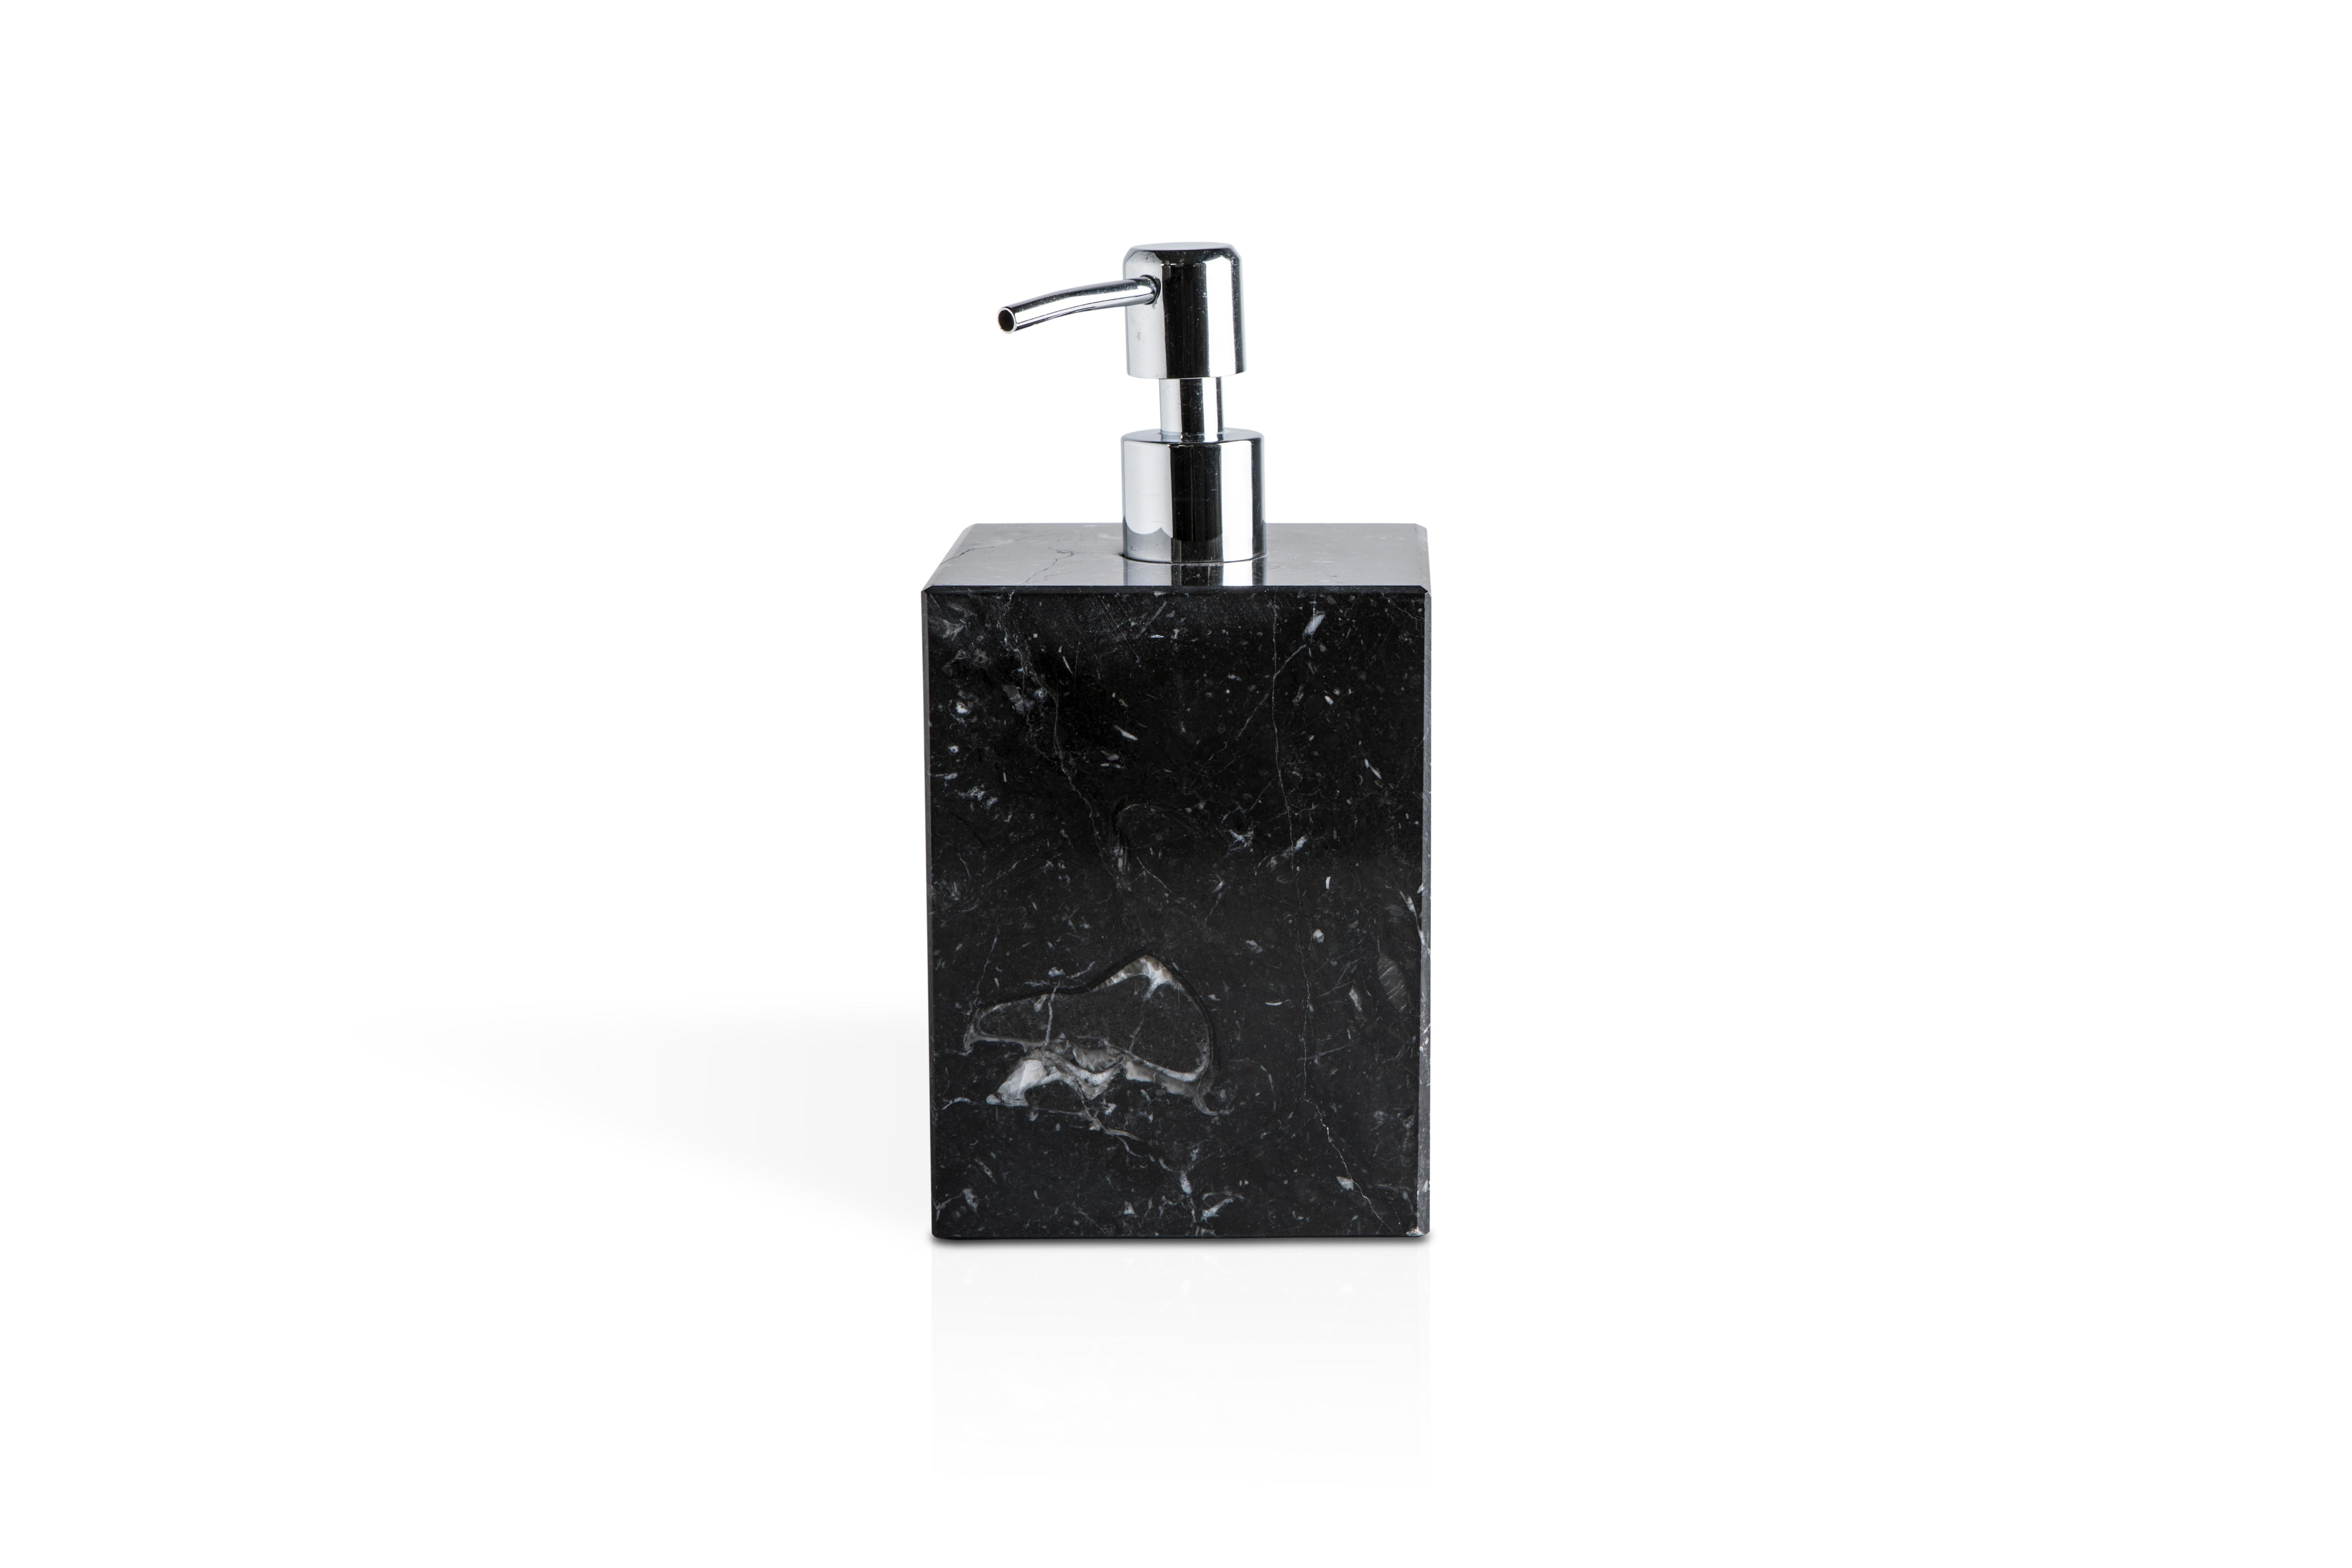 A squared set for the bathroom in black Marquina marble which includes: one soap dispenser (9 x 9 x 19 cm), one soap dish (10 x 13 x 2 cm), one toothbrush holder (8.5 x 8.5 x 12 cm), one box holder with lid (9.5 x 9.5 x 9.5 cm).
Each piece is in a